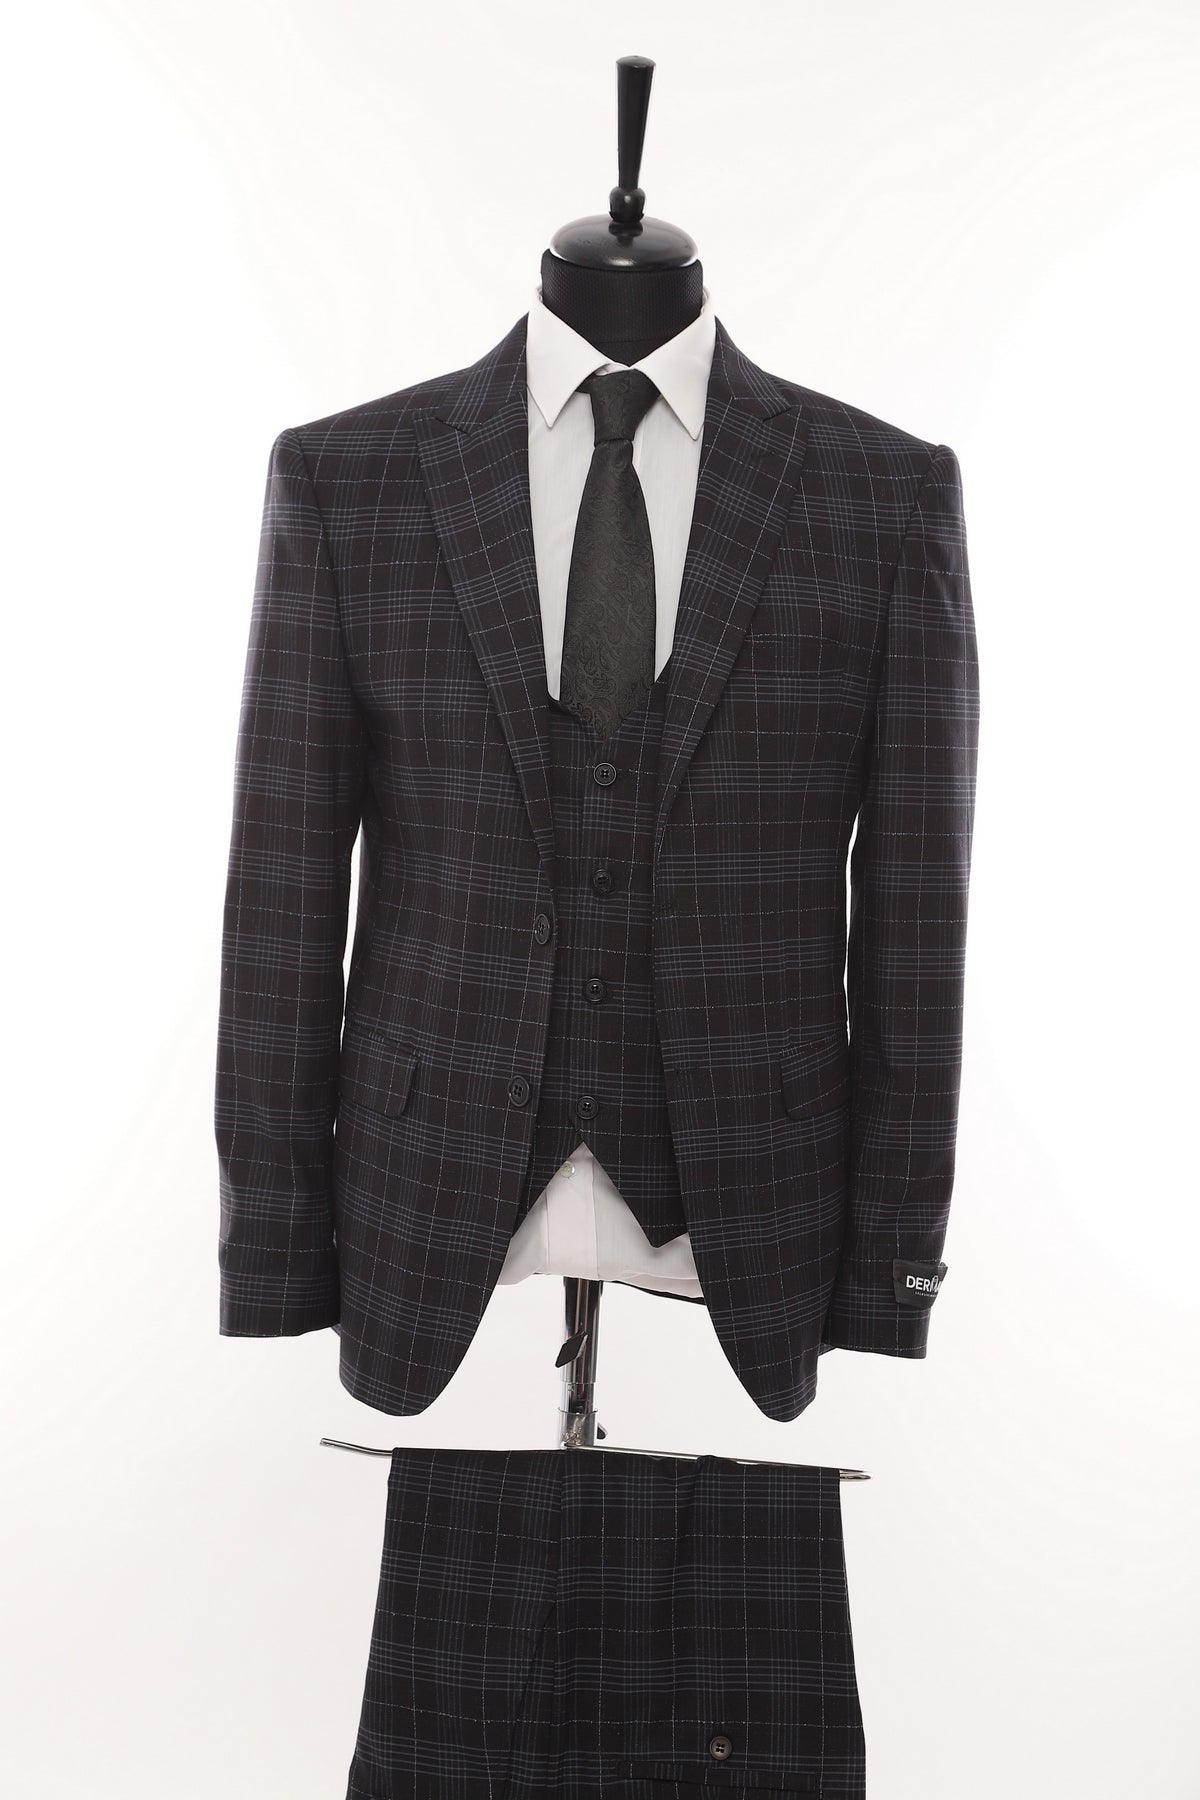 Double Breasted Black Square Patterned Fabric 3 Piece Suit